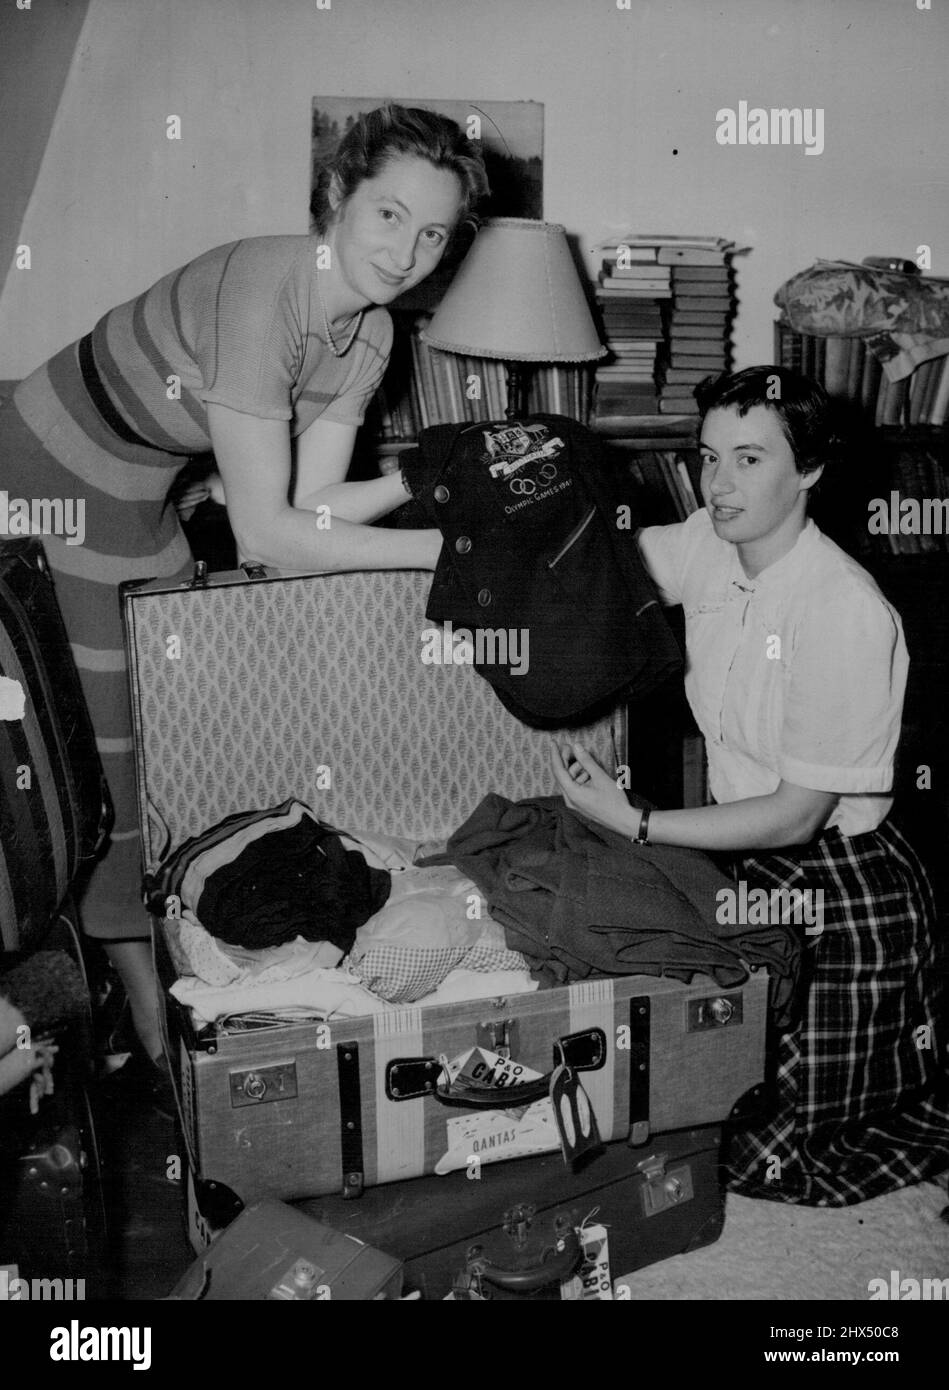 Australian Olympic Girls Get Ready To Leave -- Two of Australia's Olympic Games athletes-sprinter, hurdler and Olympic Gold Medal winner Shirley Strickland (left) and long jumper Verna Johnson-putting the finishing touches to their packing in London today (Tuesday) before leaving later in the day on the homeward journey to Australia. October 07, 1952. (Photo by Reuterphoto). Stock Photo